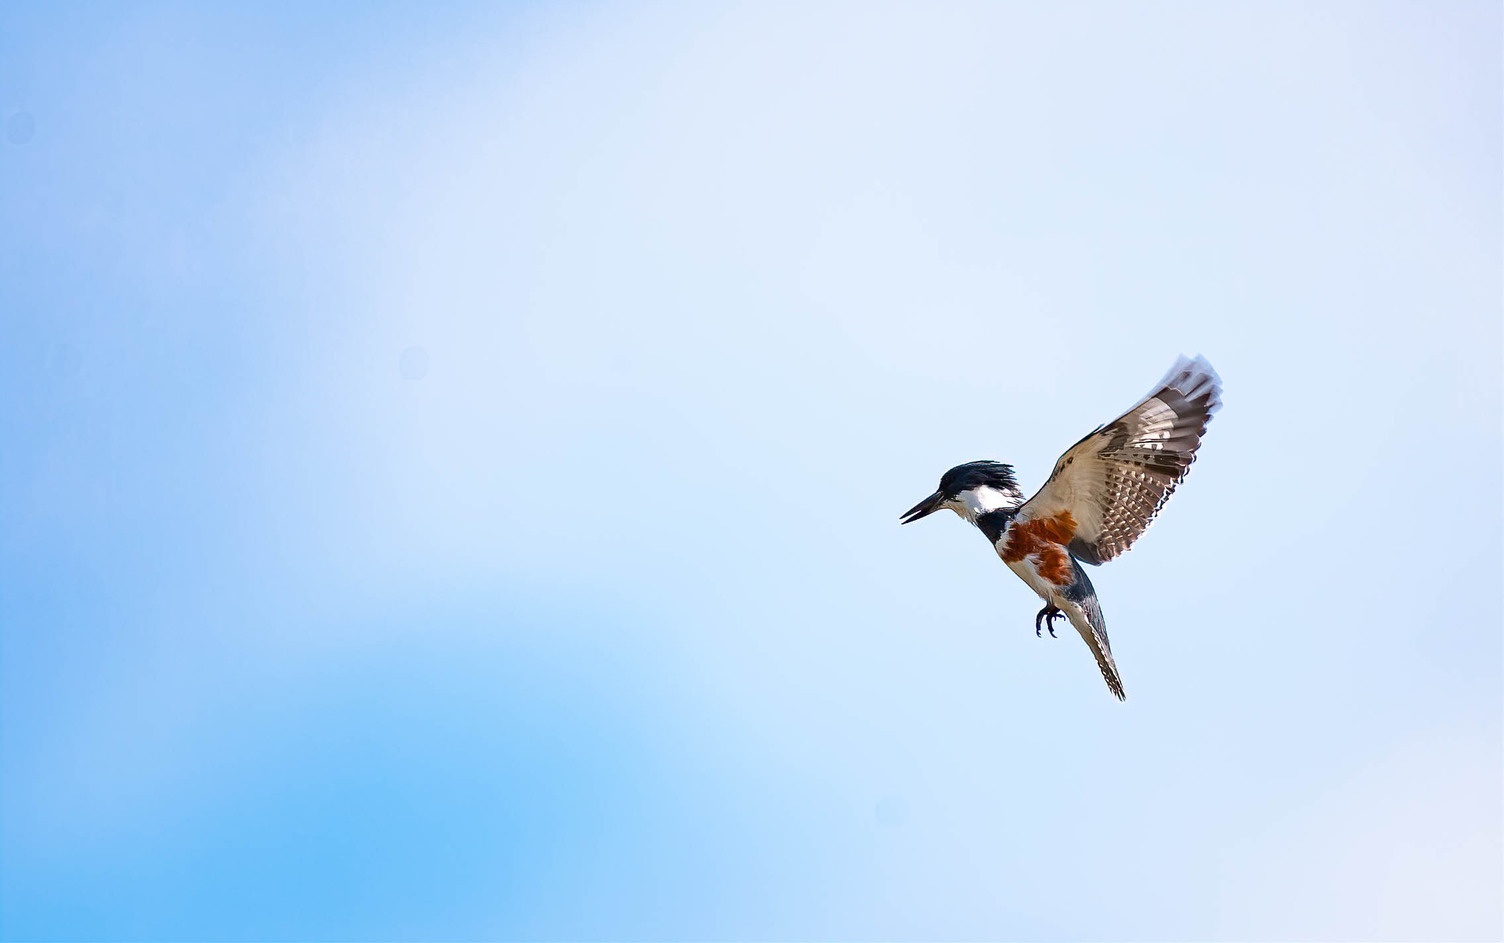 A black, white, and reddish bird flaps its wings mid-flight against a bright blue sky.